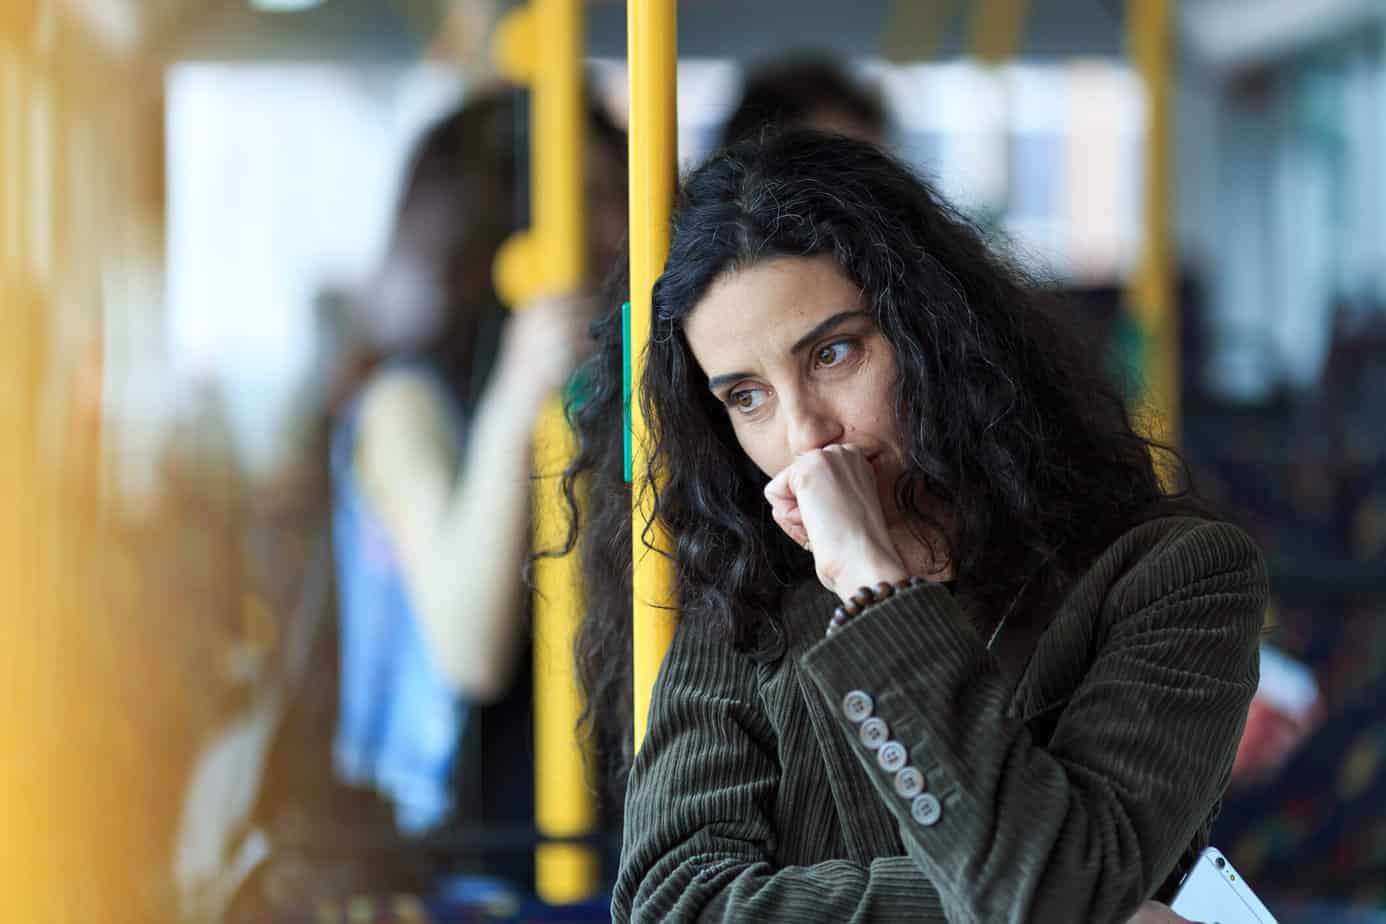 woman standing pensively on public transport bus